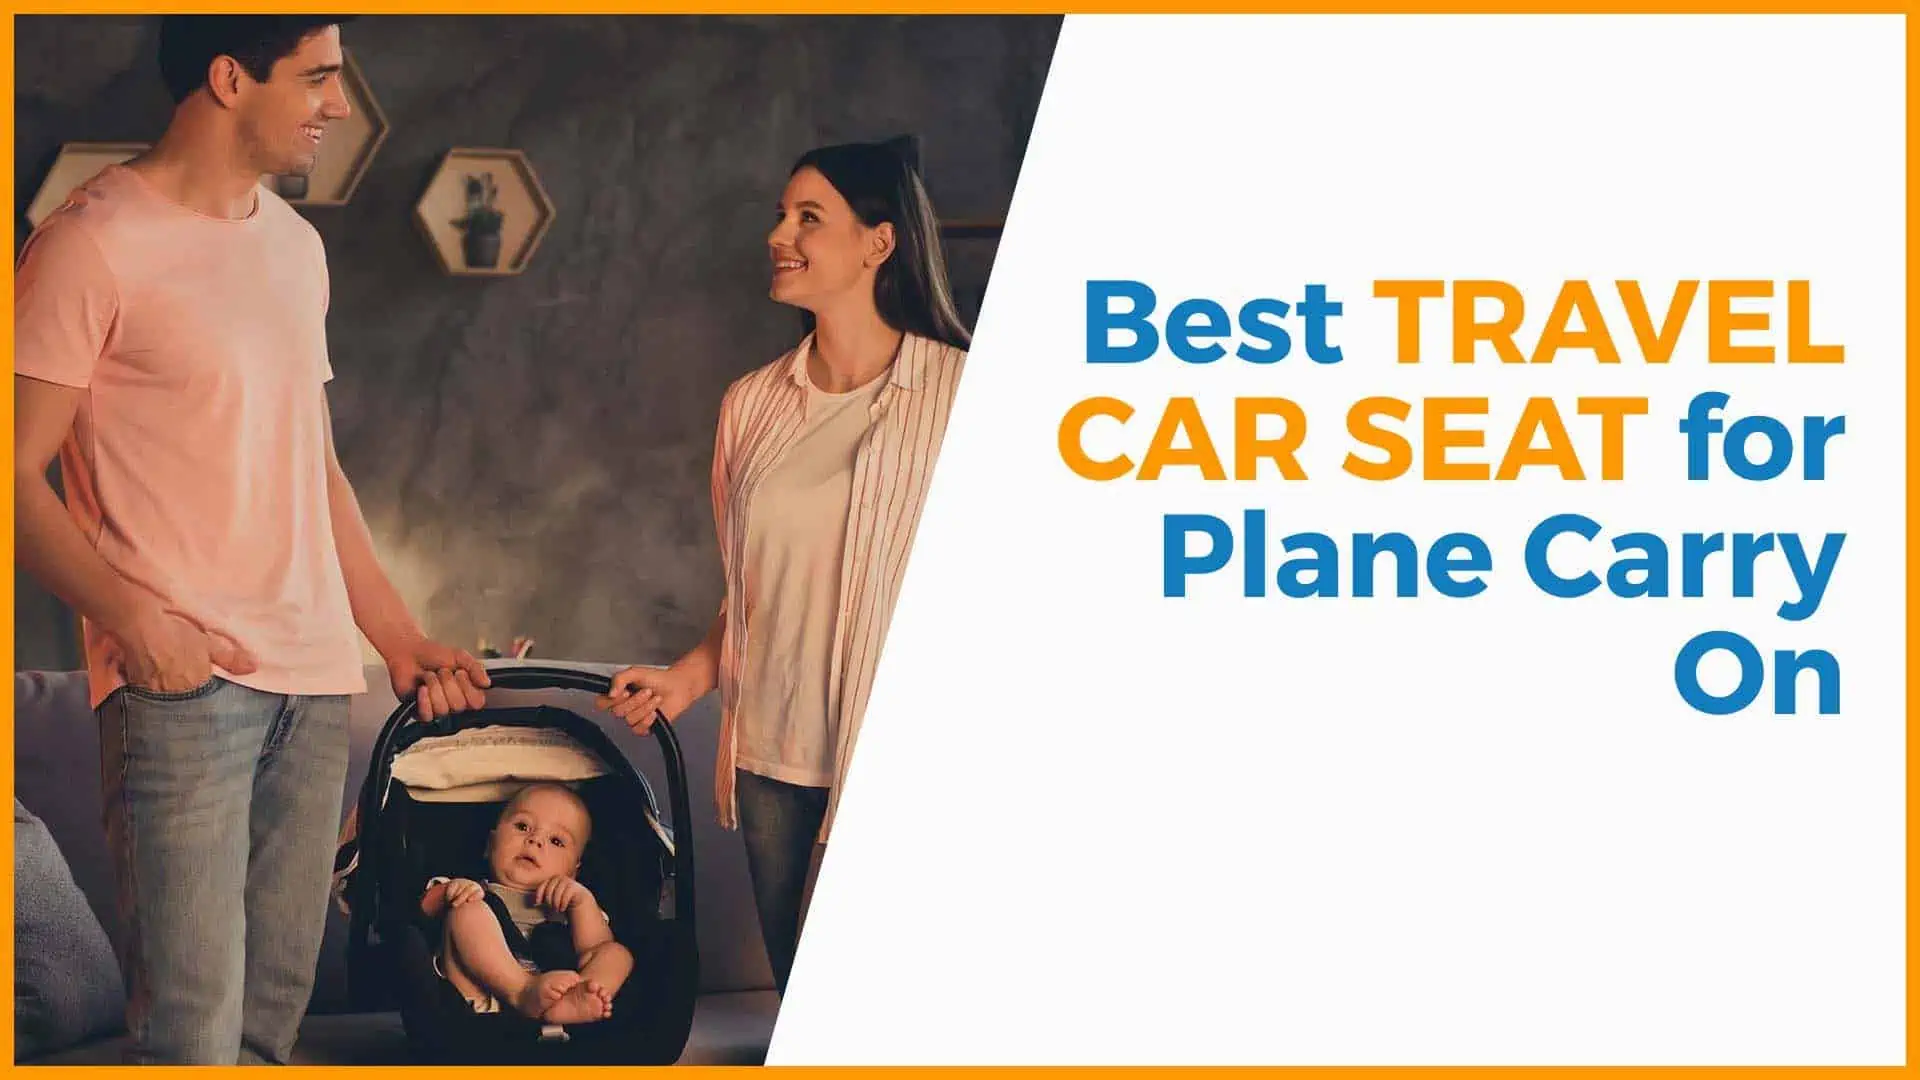 The Best Travel Car Seat for Plane Carry On